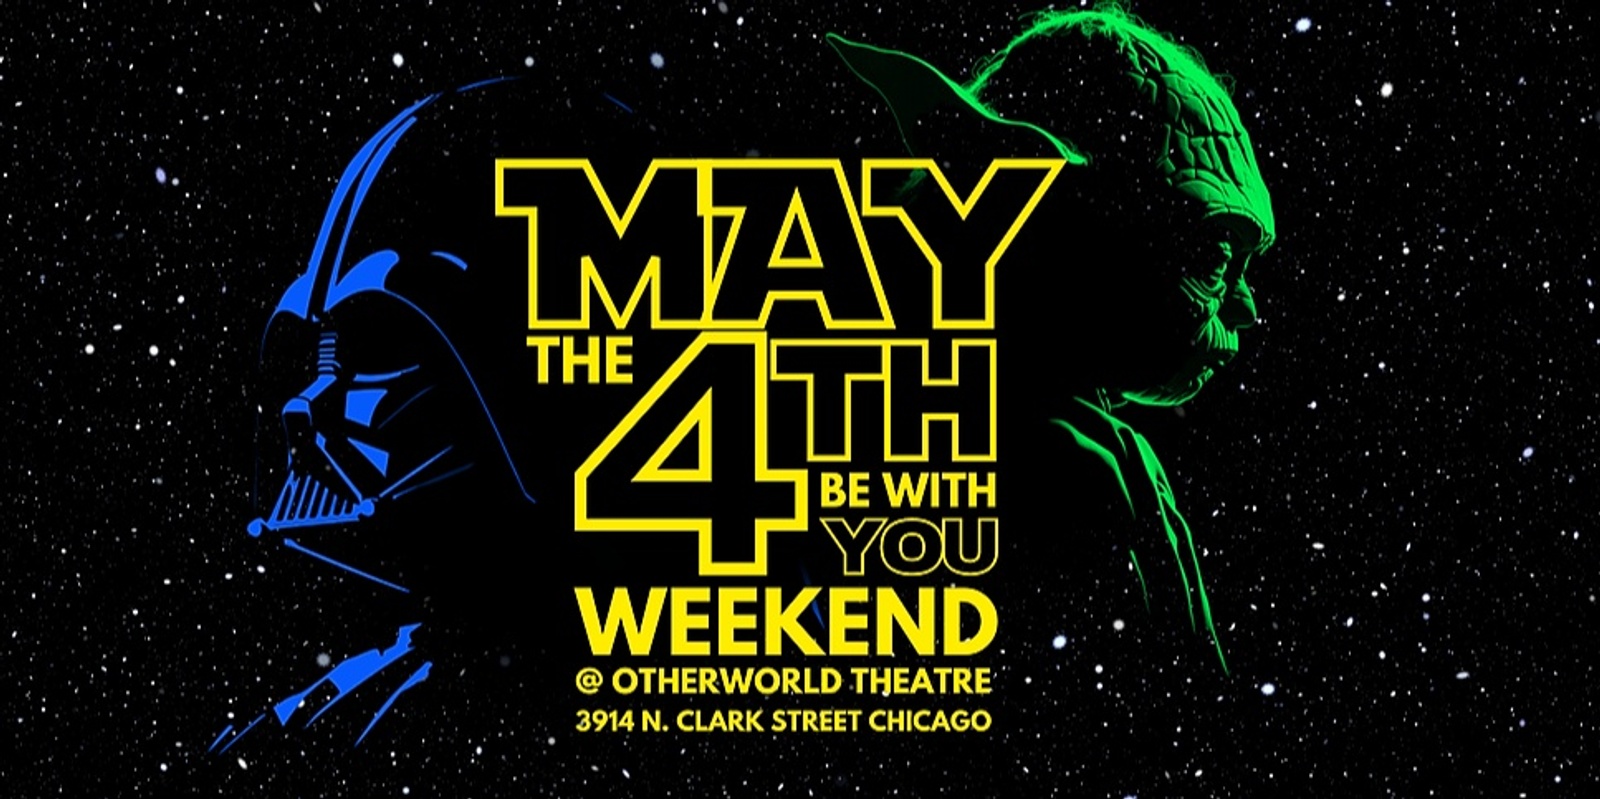 Banner image for May the 4th Be With You Weekend @ Otherworld Theatre